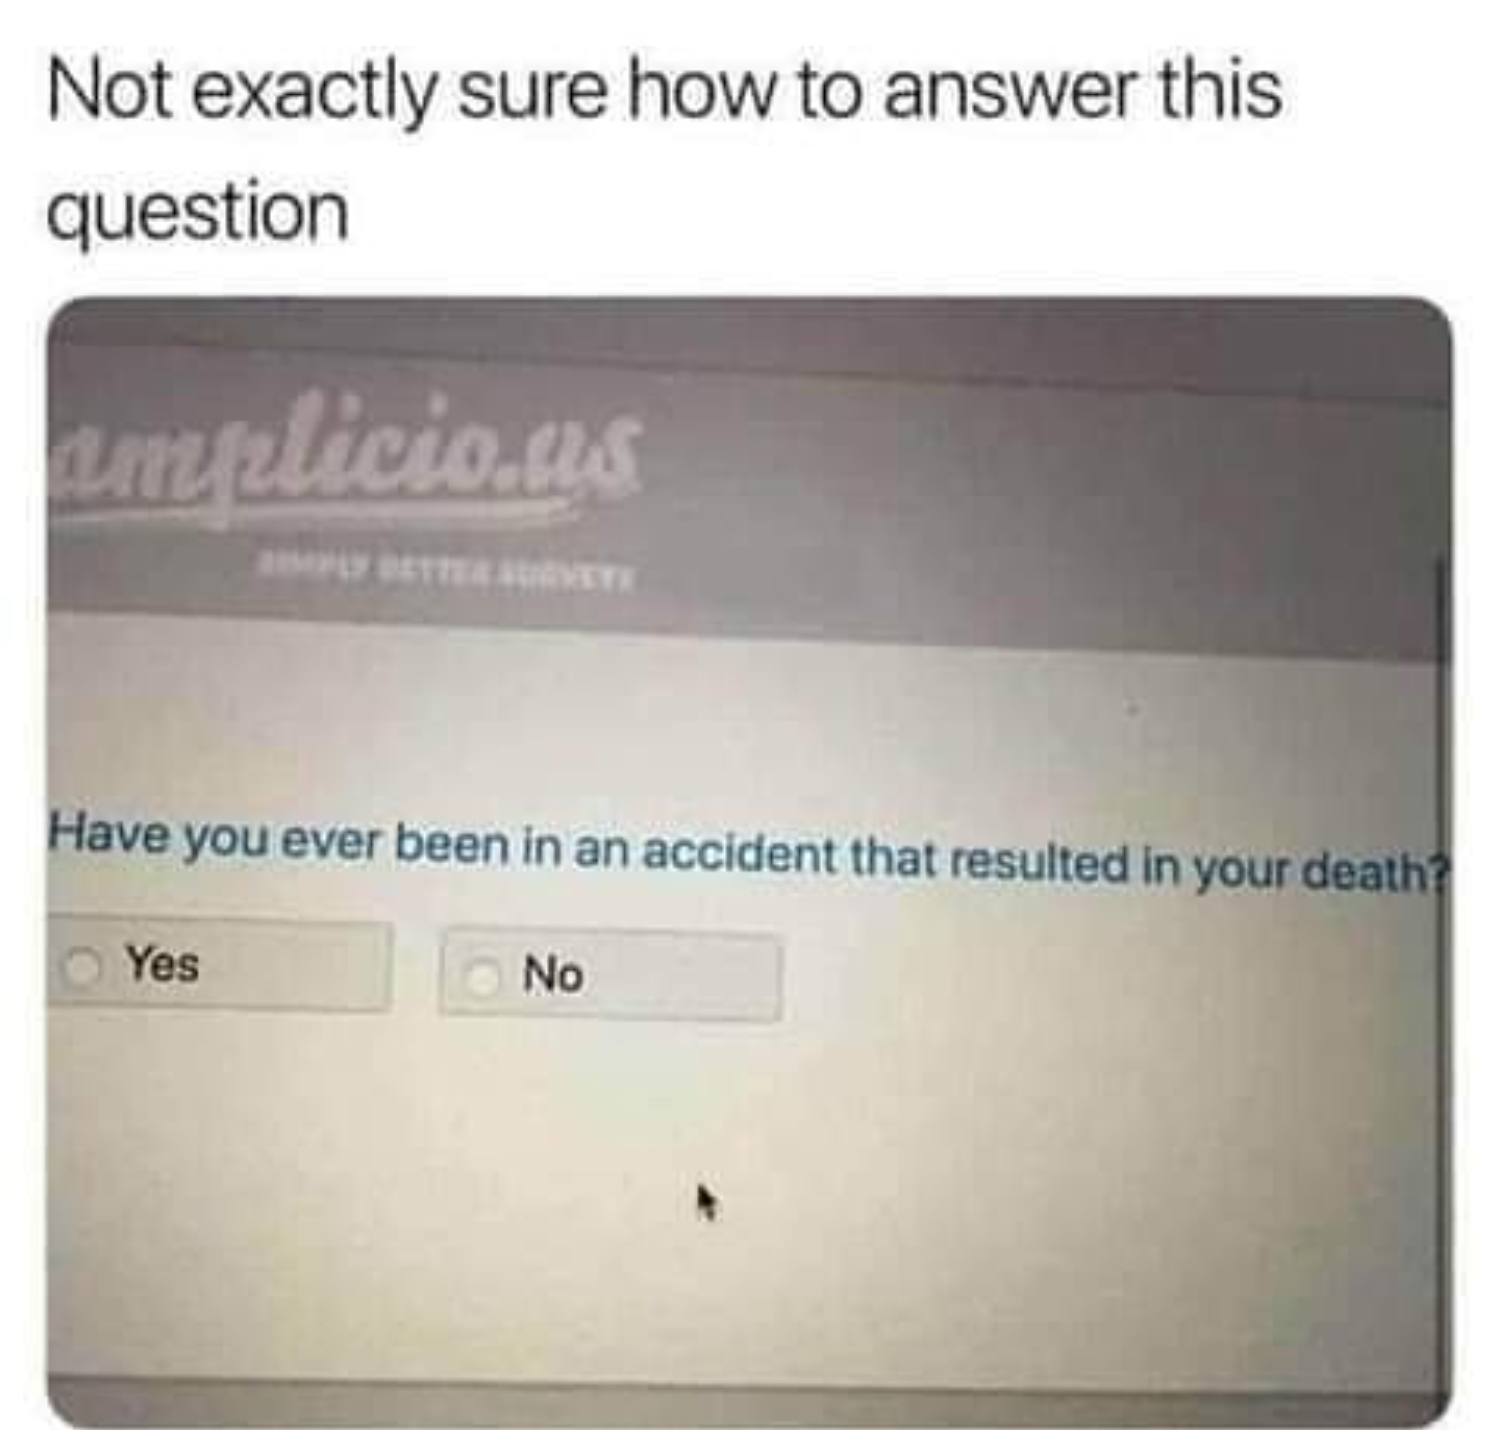 funny gaming memes - have you ever been in an accident - Not exactly sure how to answer this question urlicious Have you ever been in an accident that resulted in your death Yes No